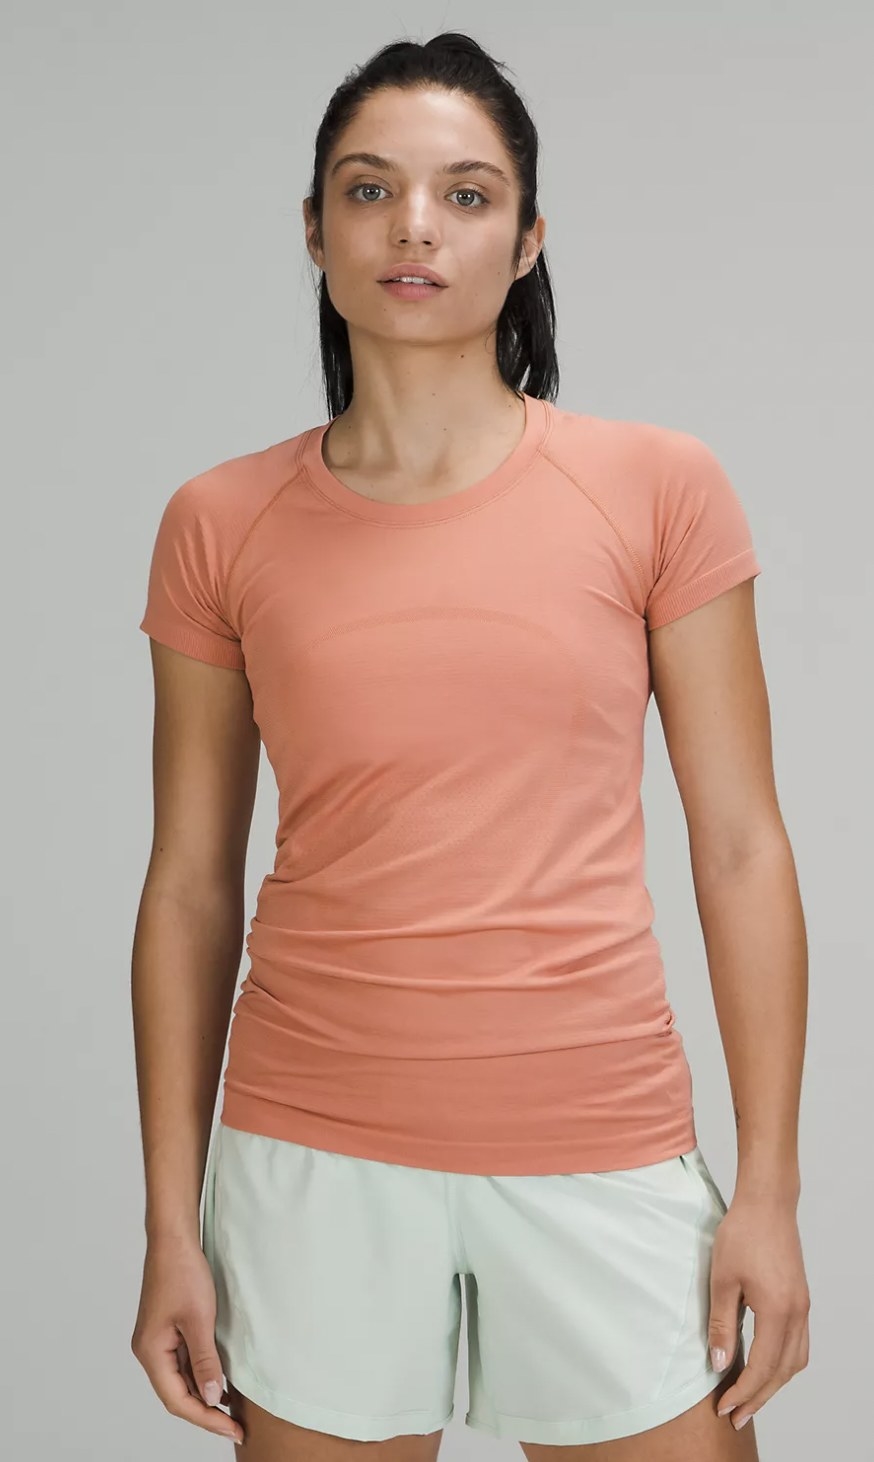 front view of model wearing the fitted t-shirt in coral